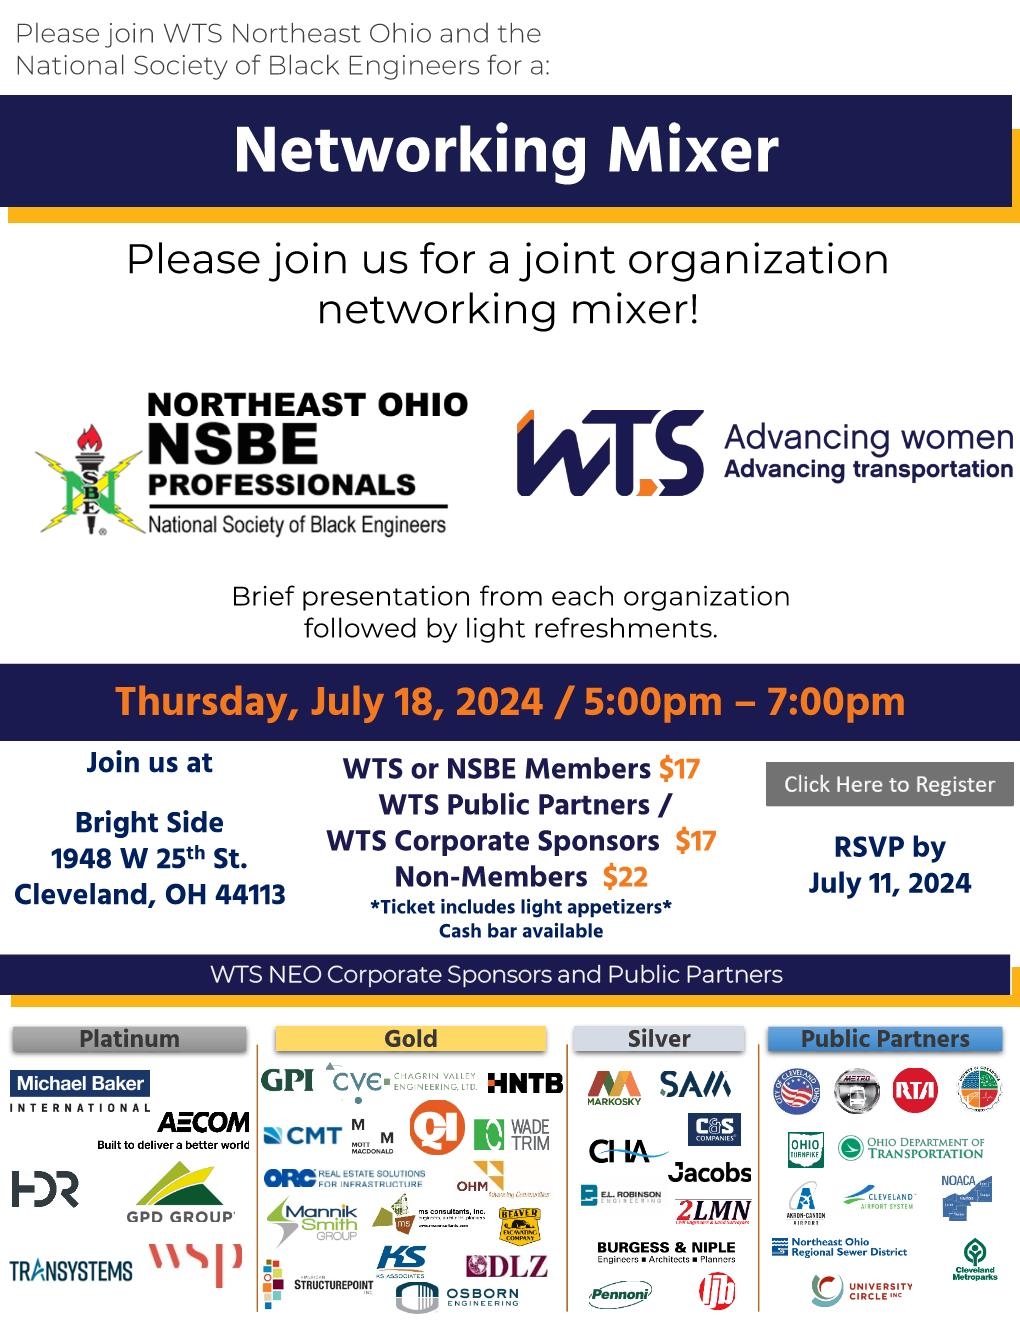 networking event